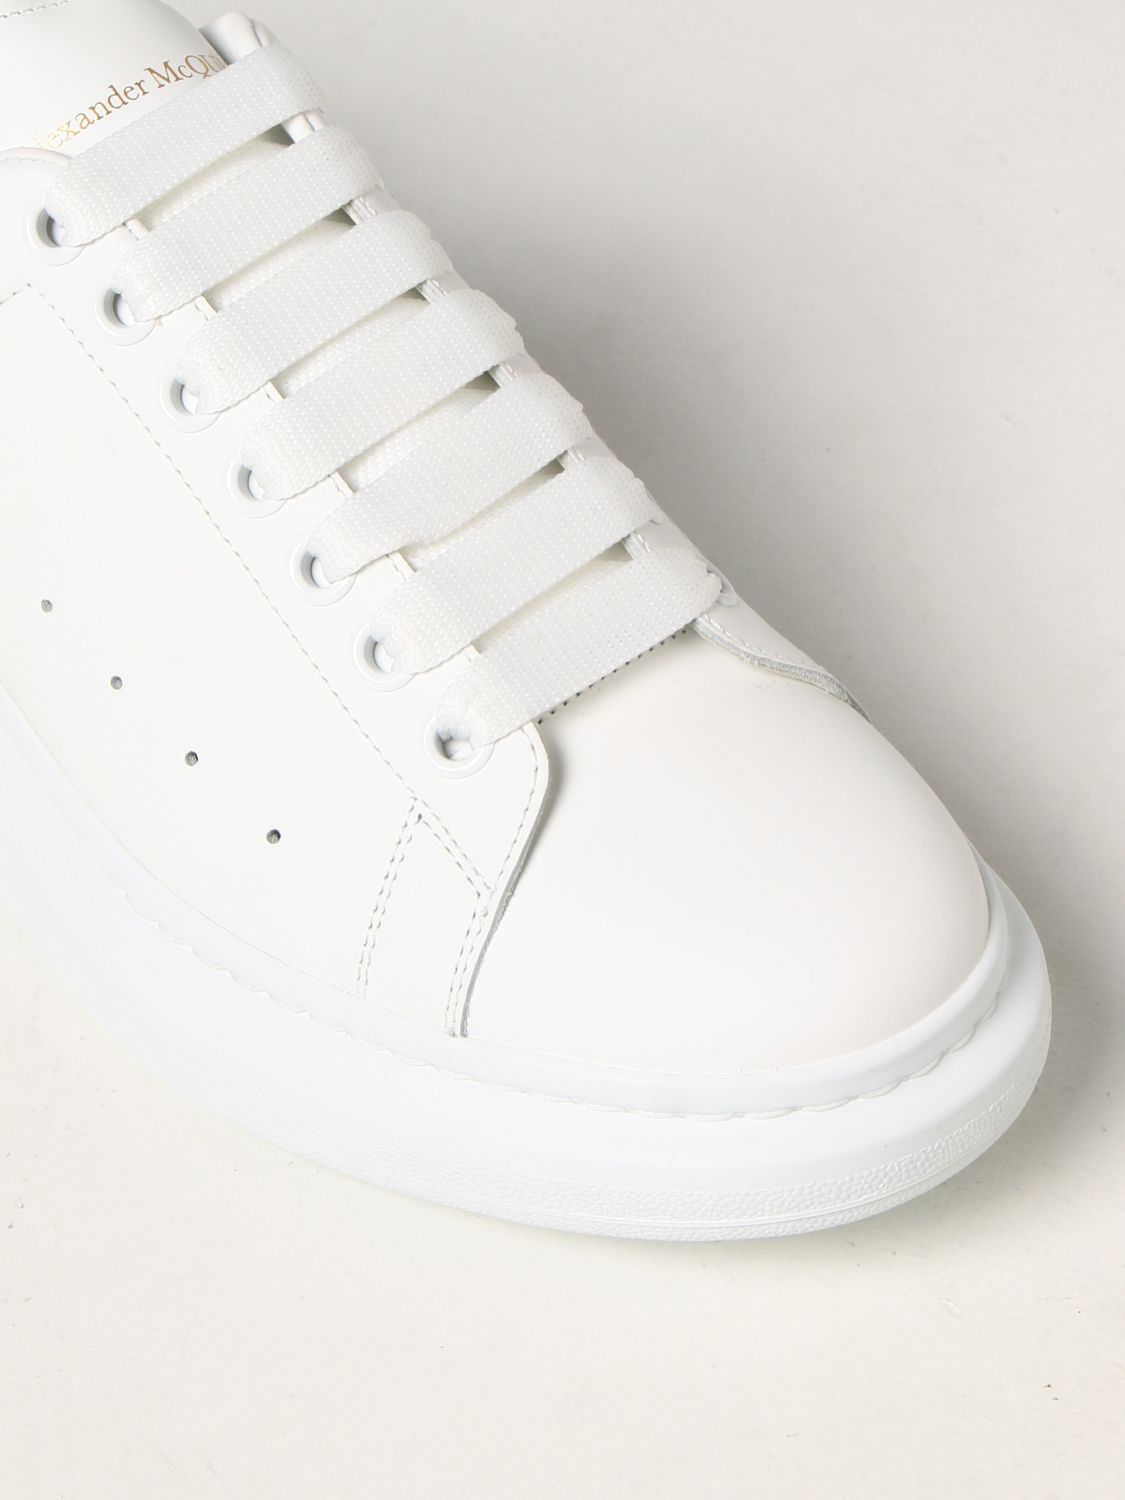 ALEXANDER MCQUEEN: Larry smooth leather sneakers - White | Sneakers ...